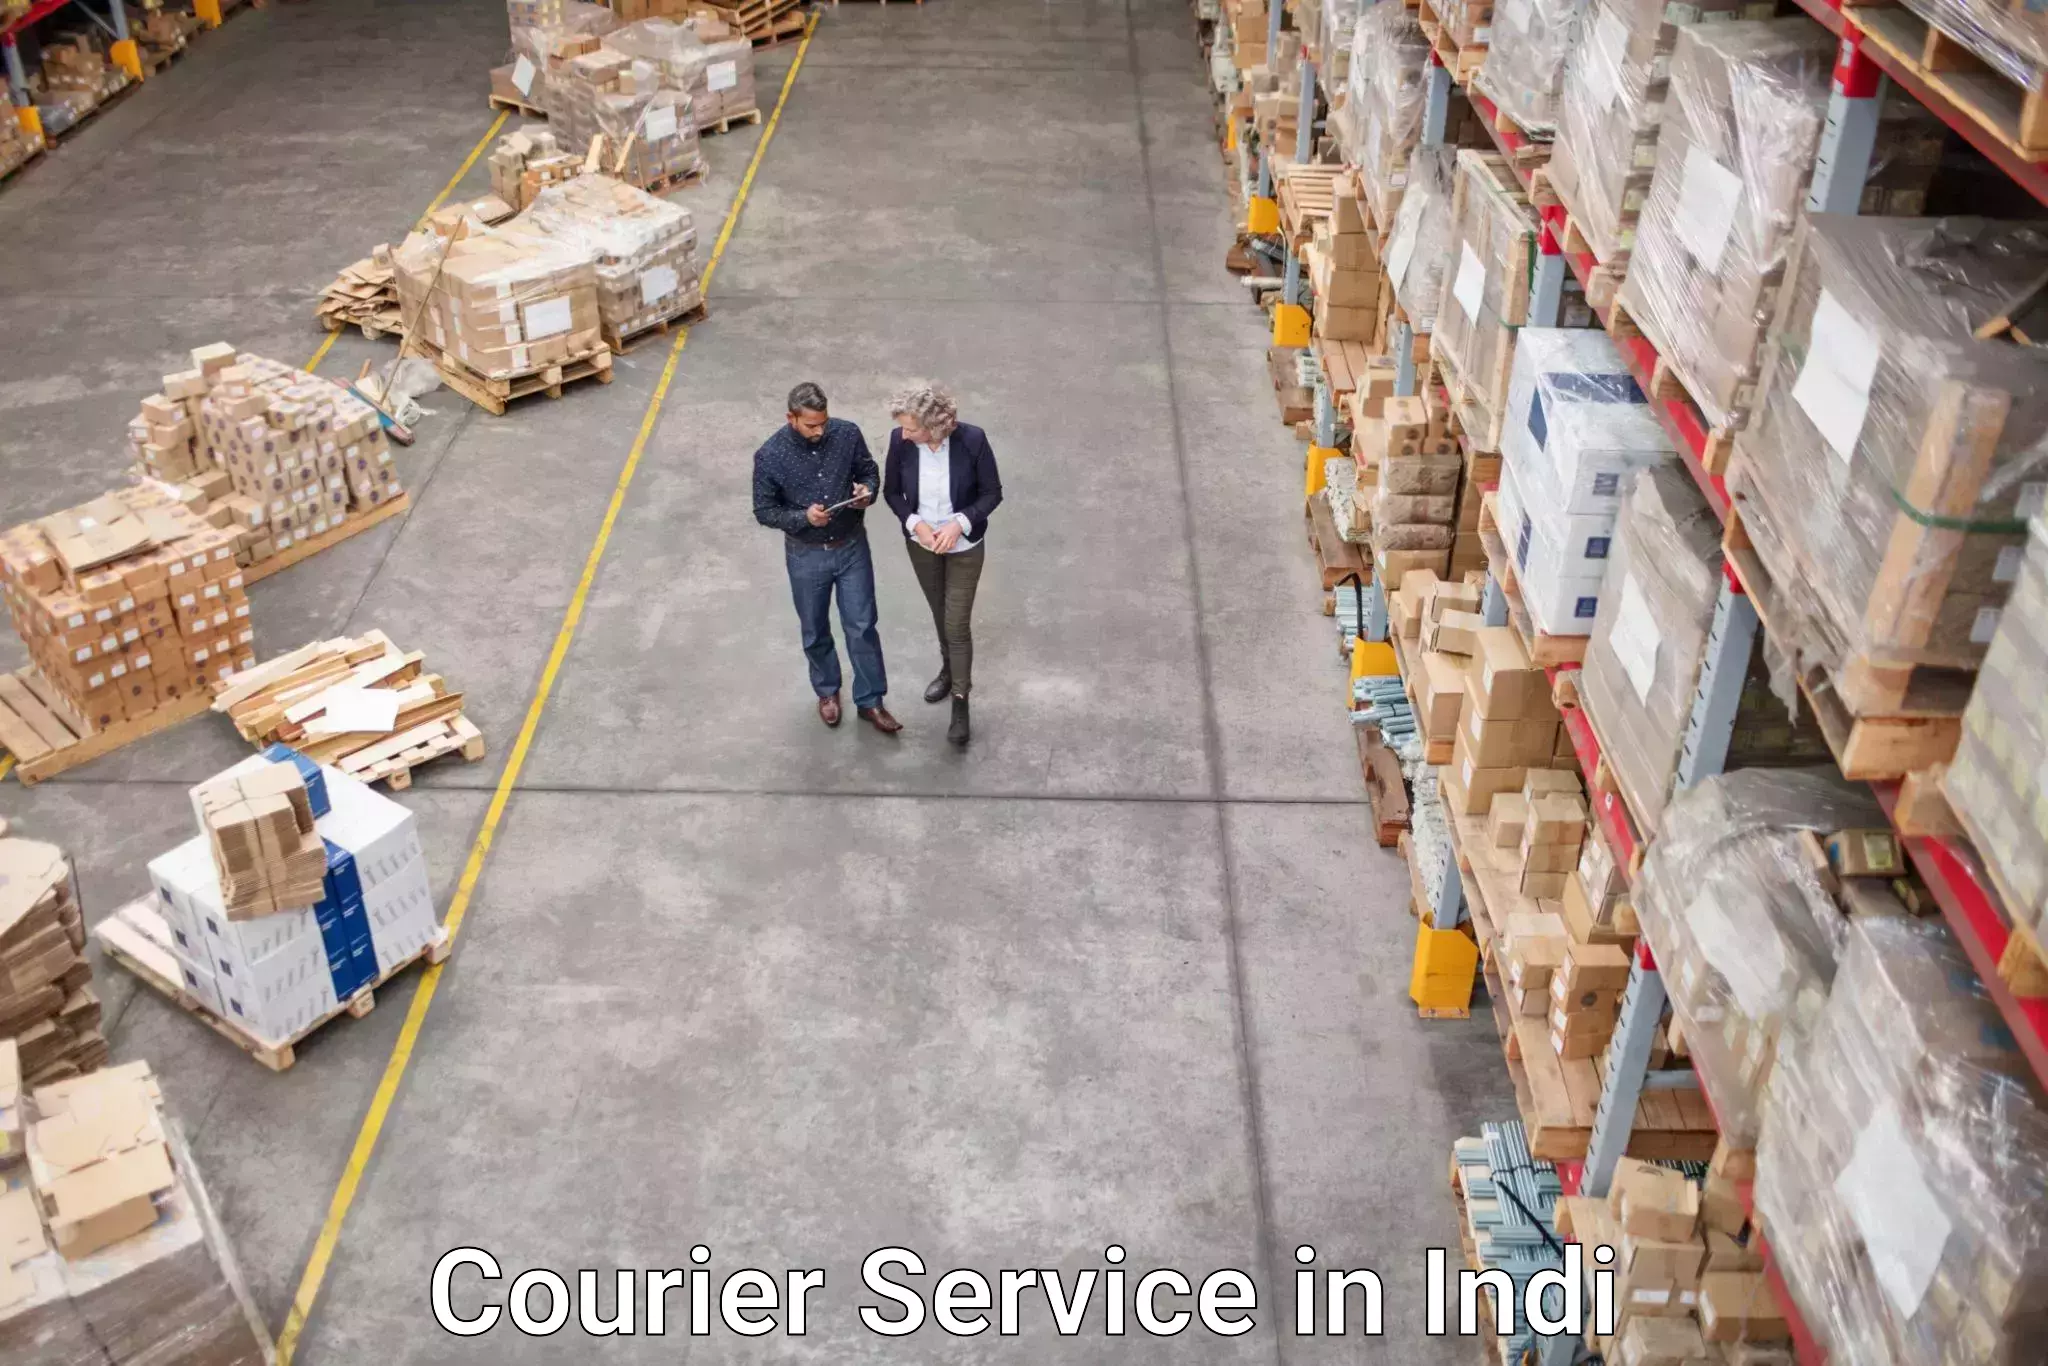 Courier service efficiency in Indi